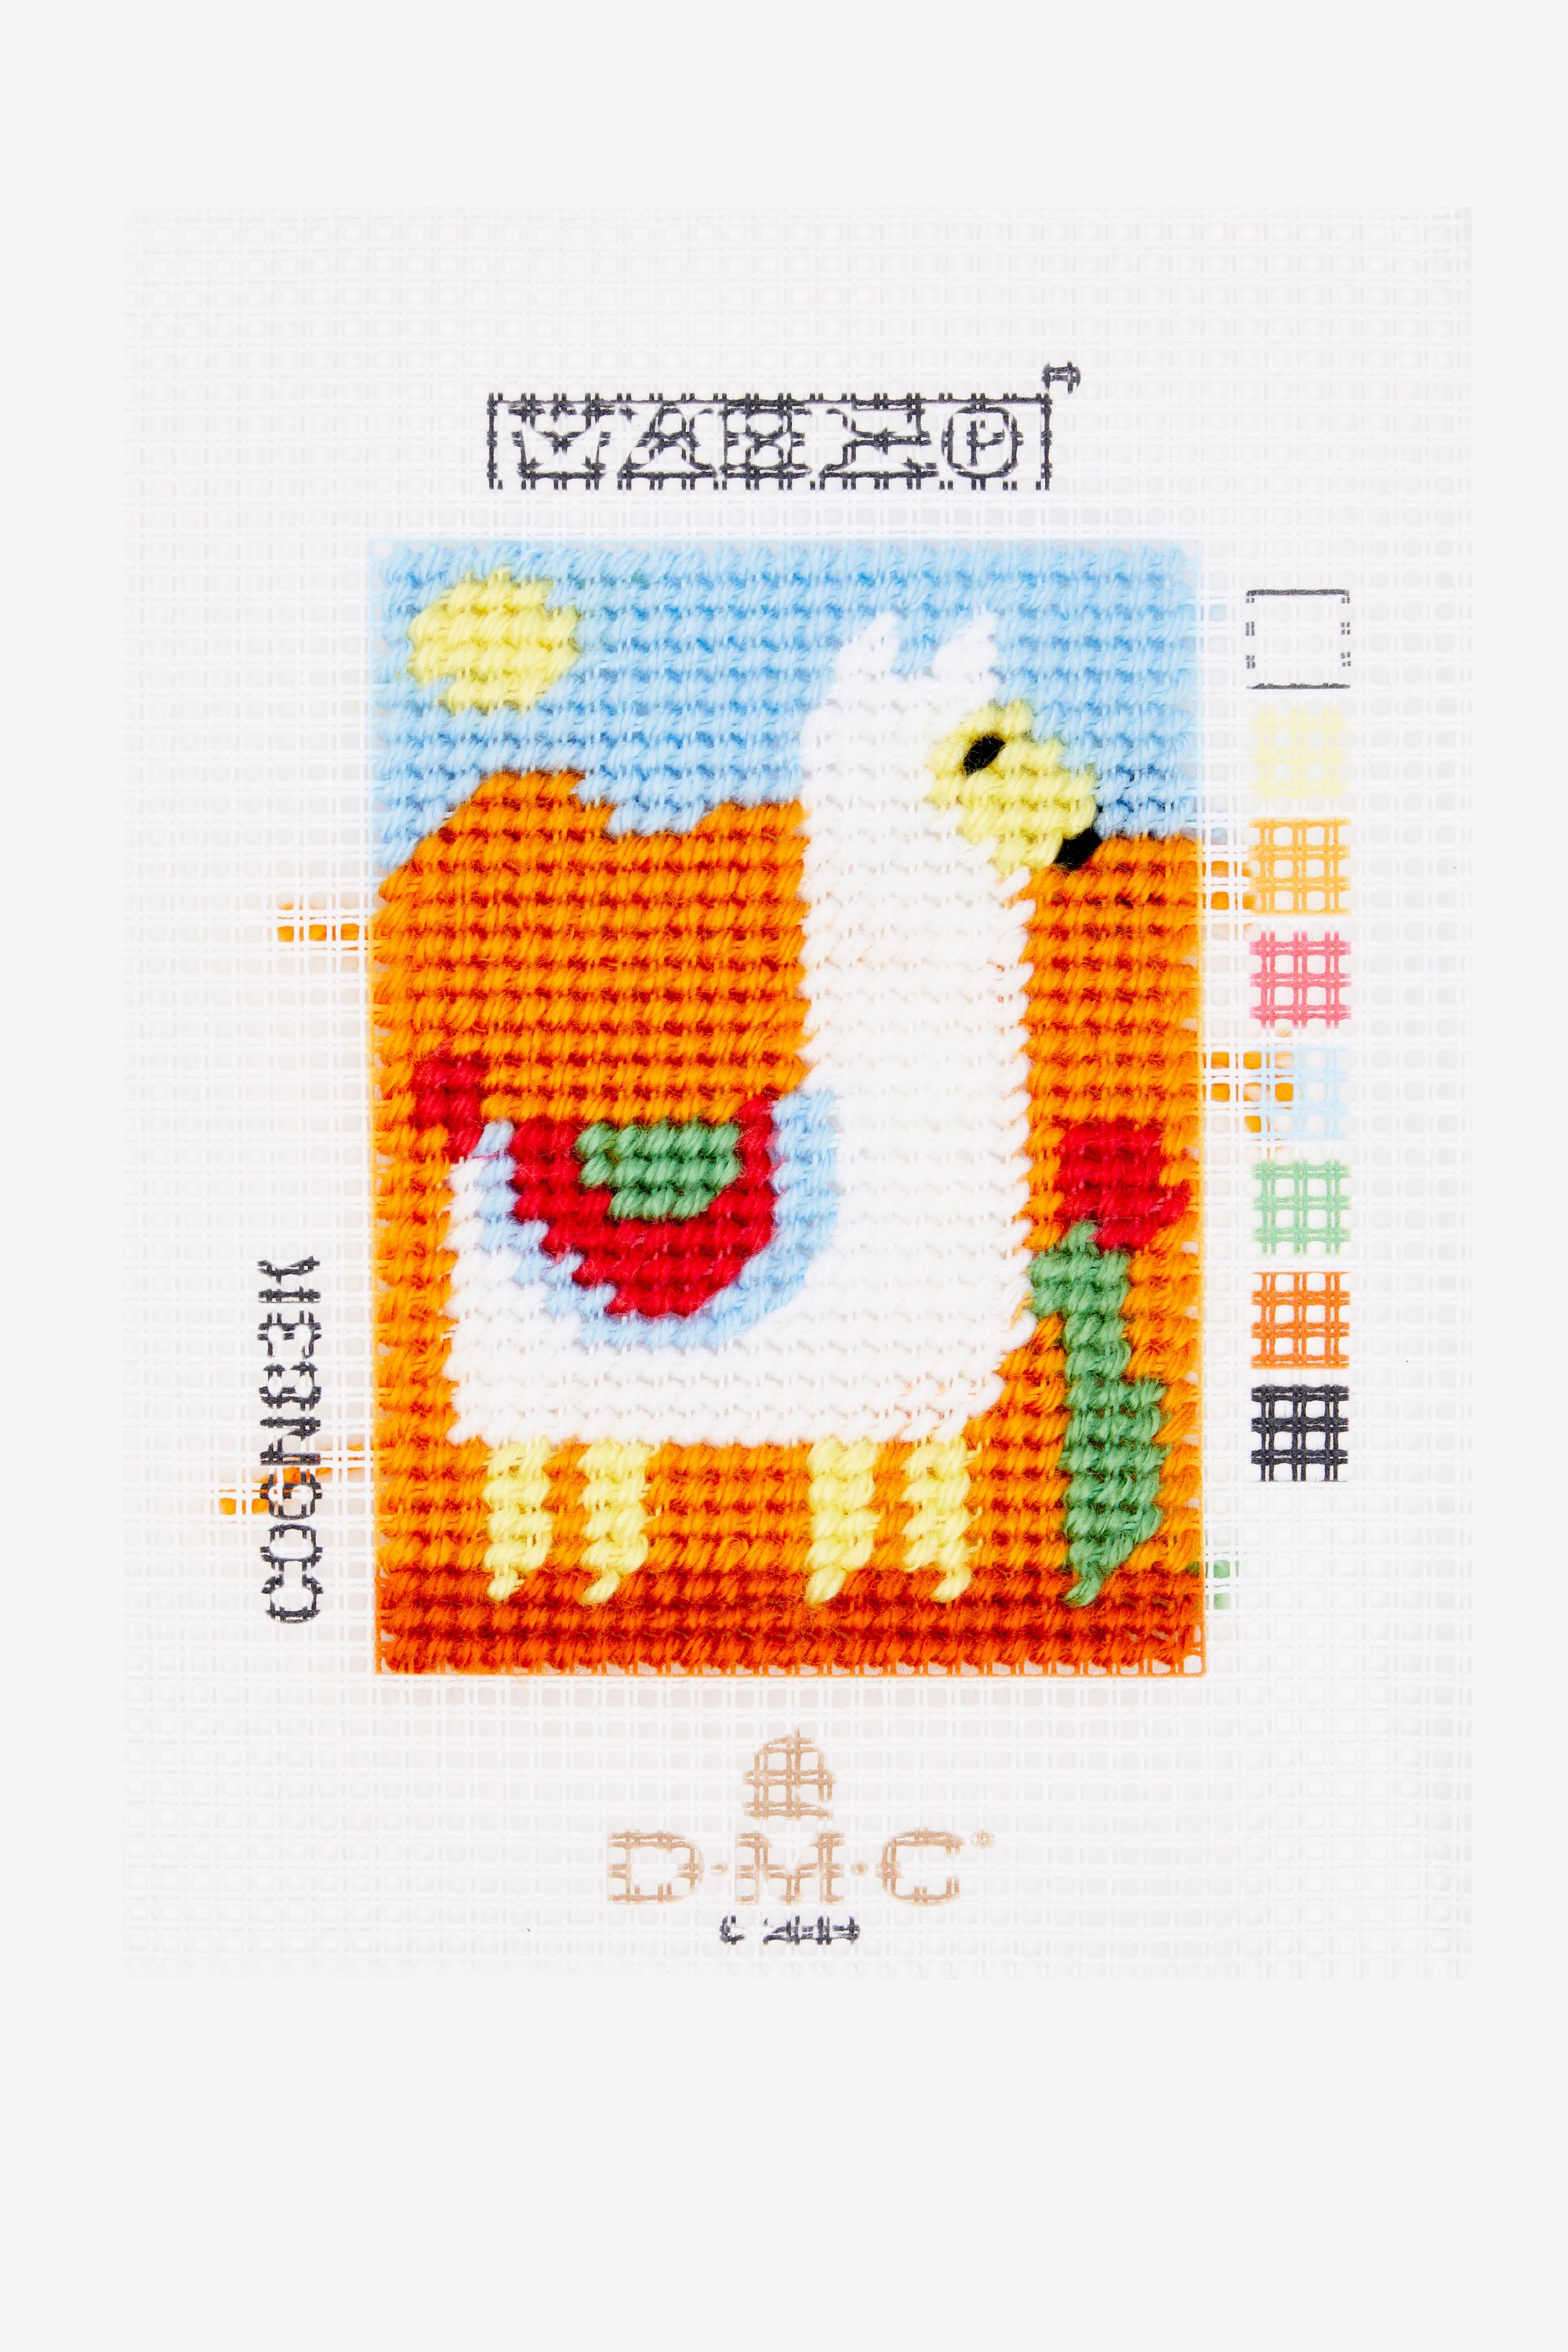 C06N83K - I Can Stitch! - Mika The Llama Tapestry Starter Kit 205 off RRP